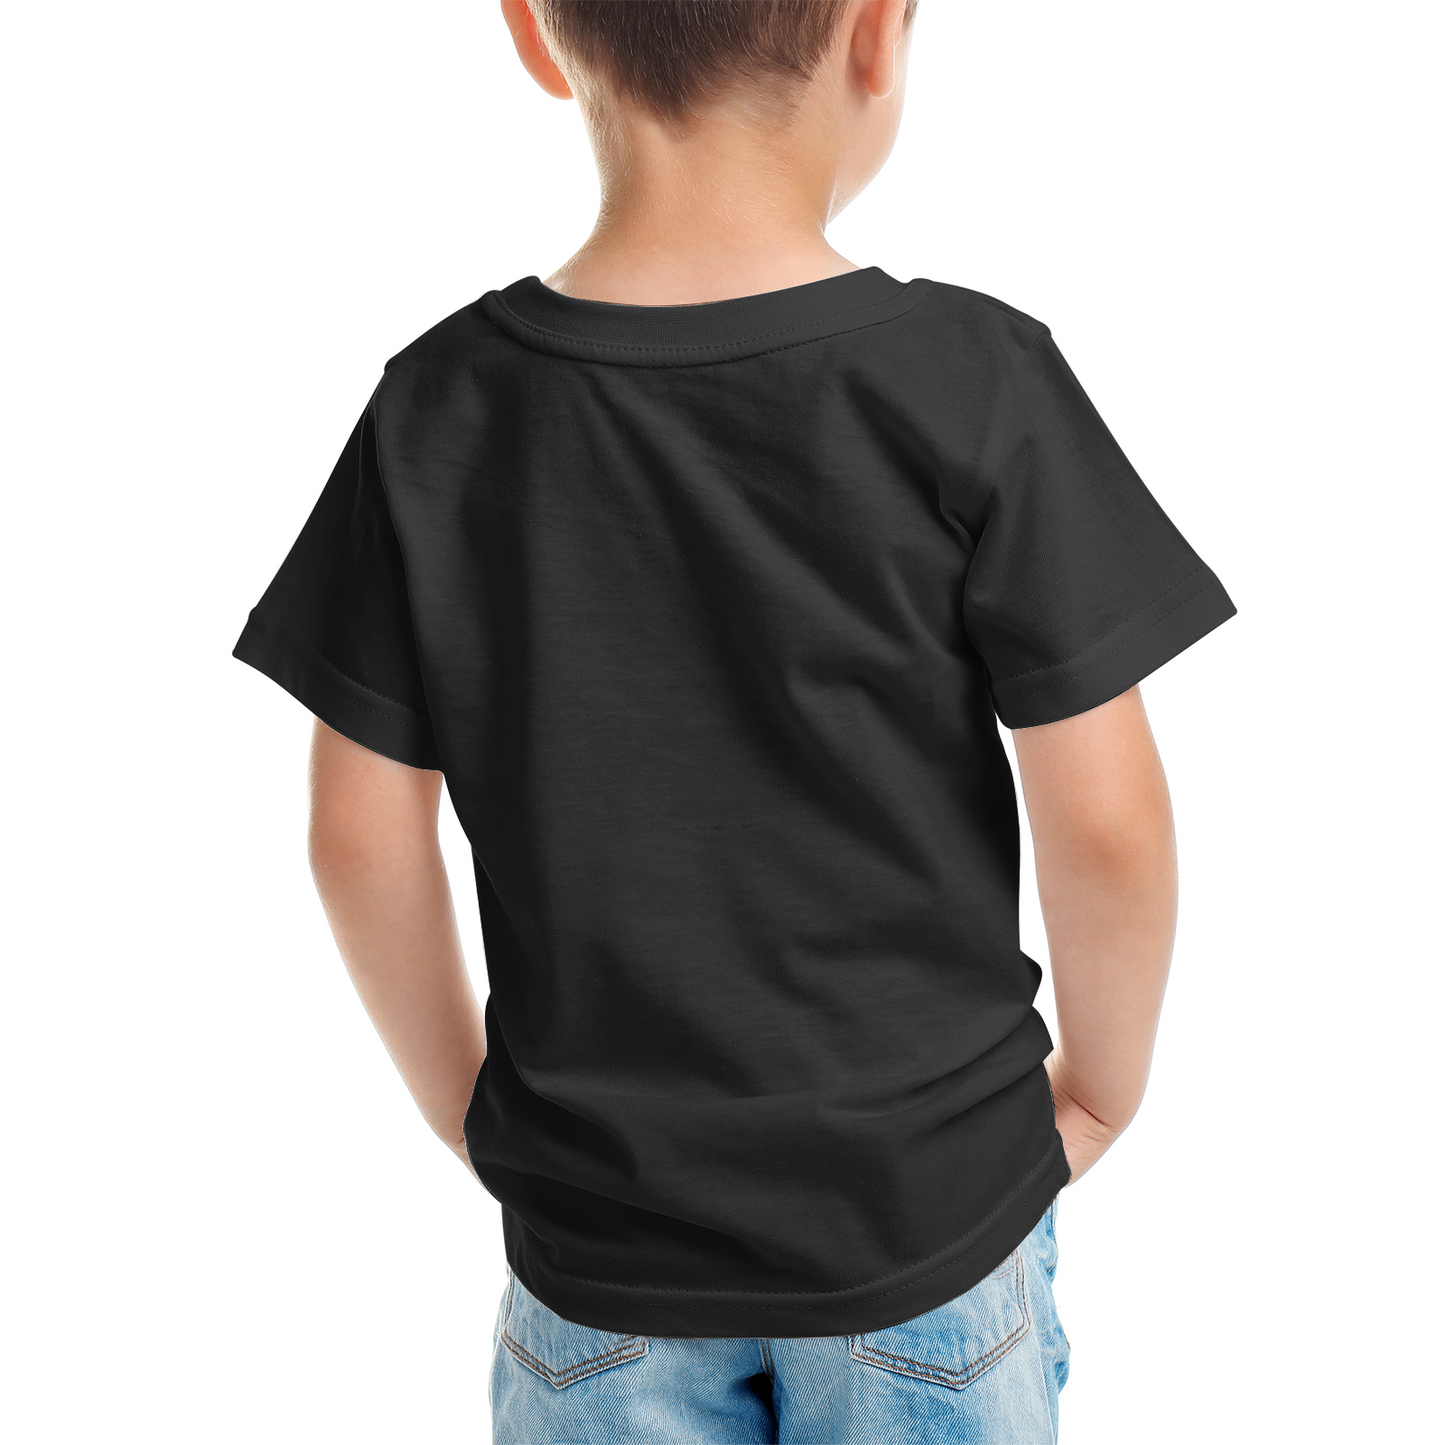 Kid's T-shirt with Myrtle the Four-Legged Chicken by D.B. print